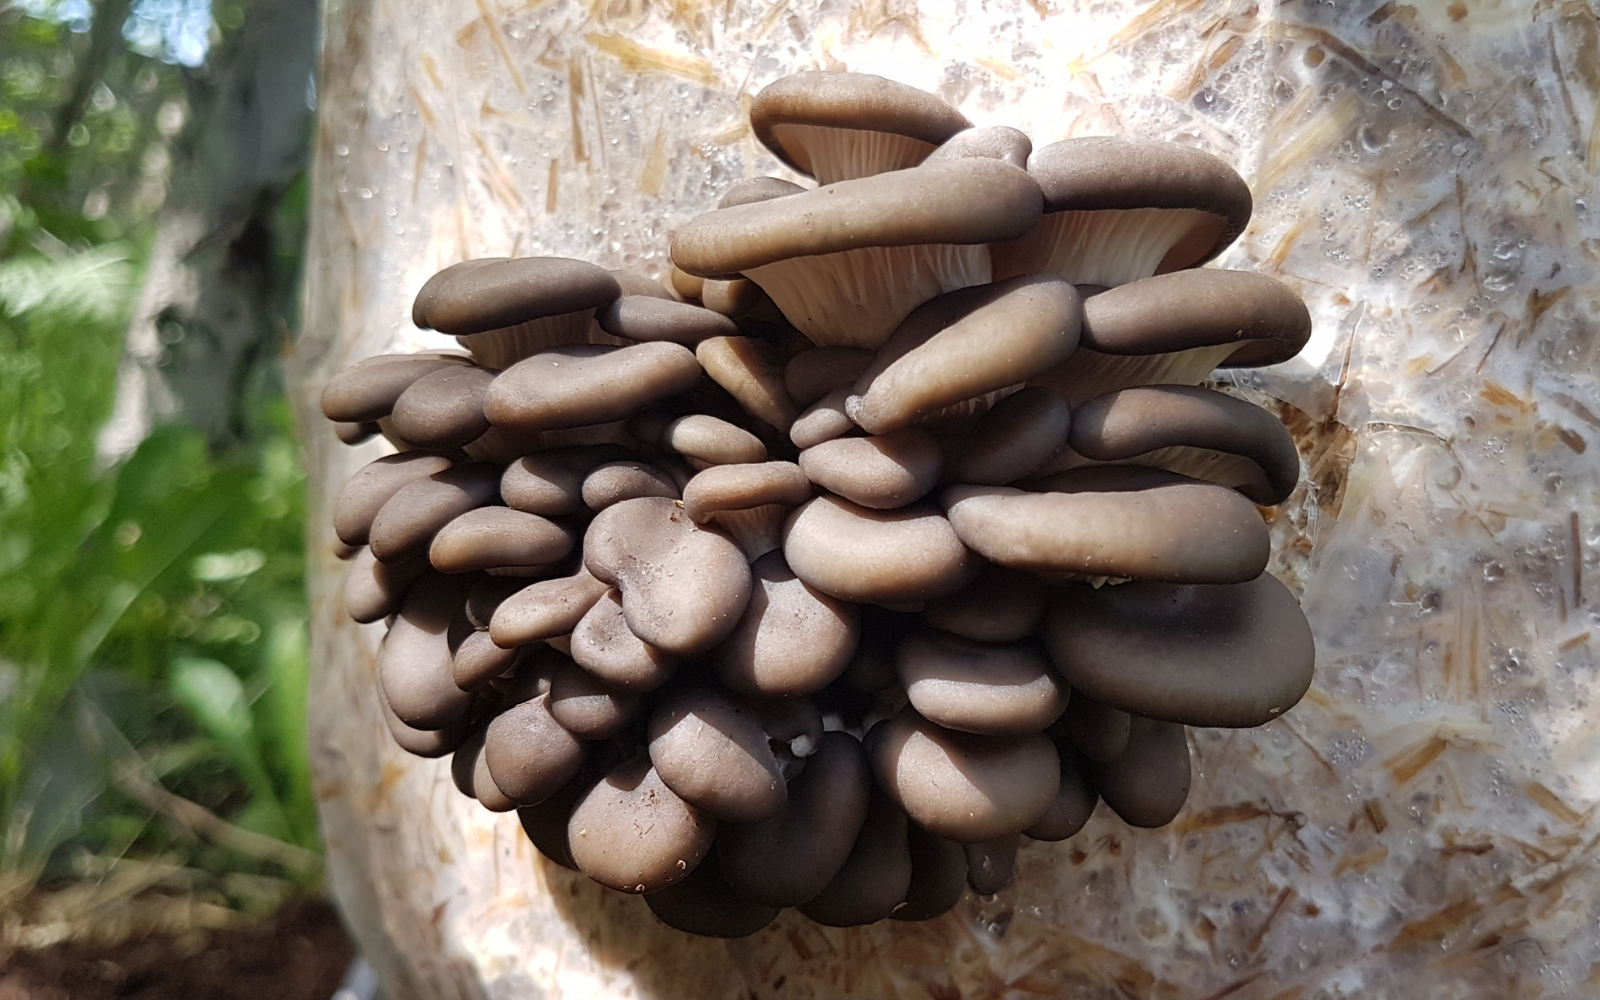 How To Grow Mushrooms on Straw: A Step by Step Guide